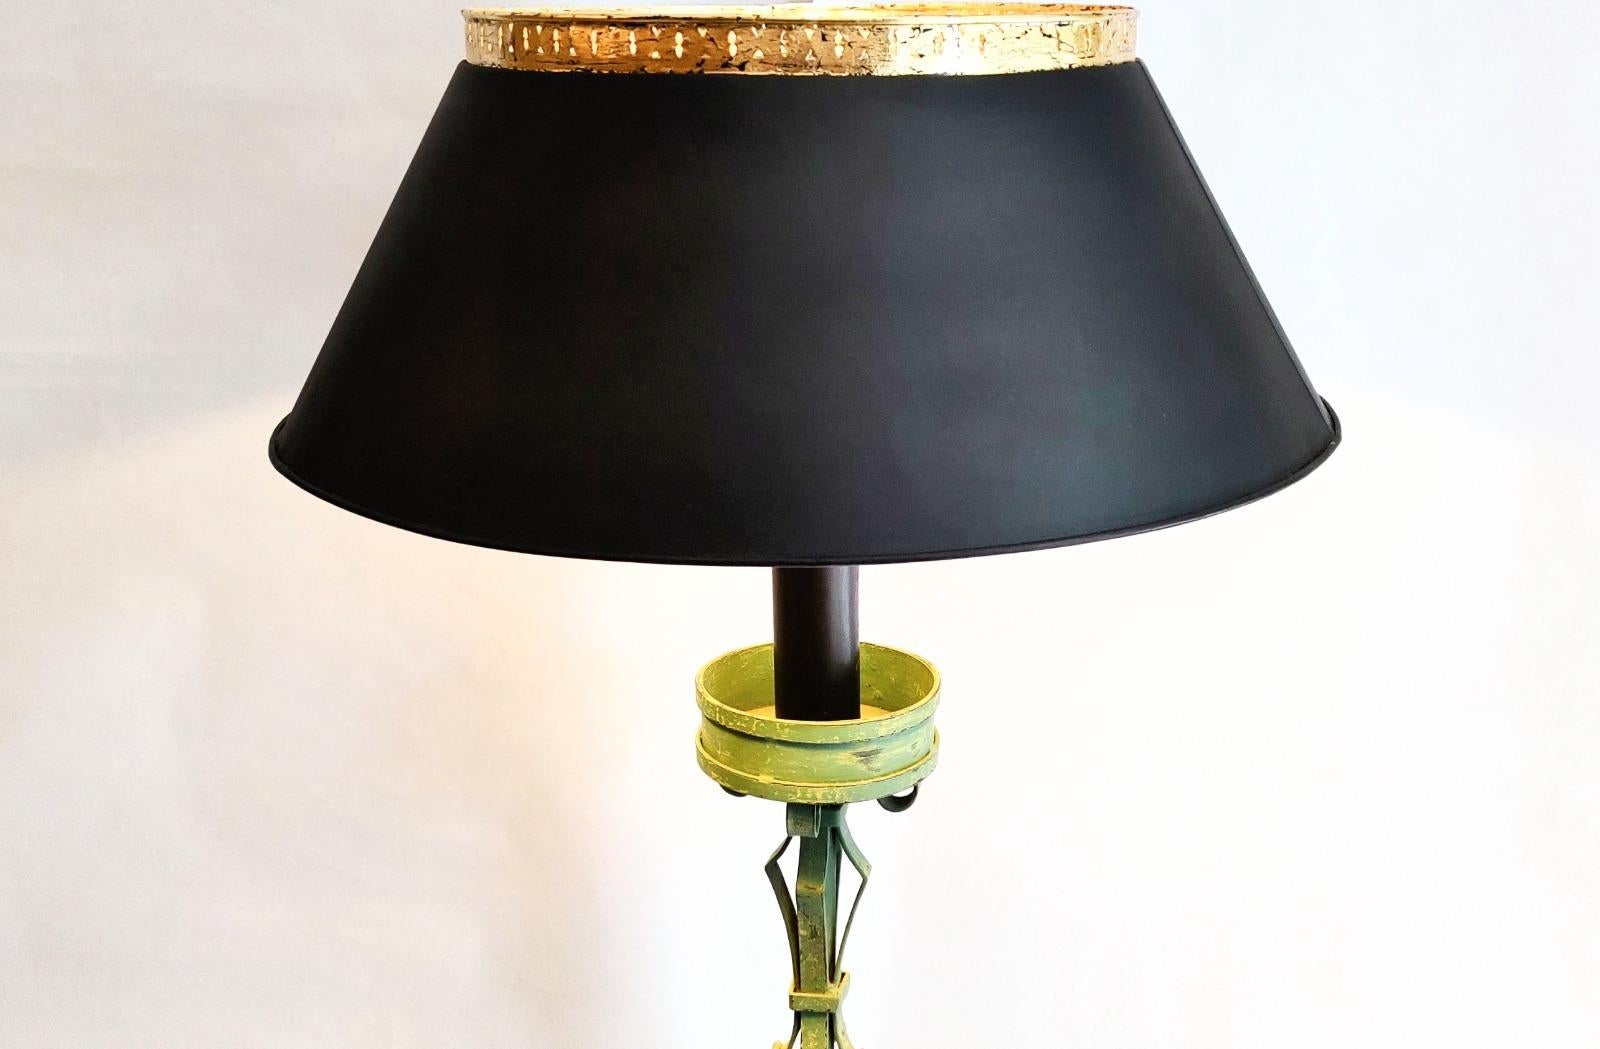 Mid-20th Century Original and Elegant Wrought Iron Lamp from the 1950s. in Green, Black and Gold. For Sale